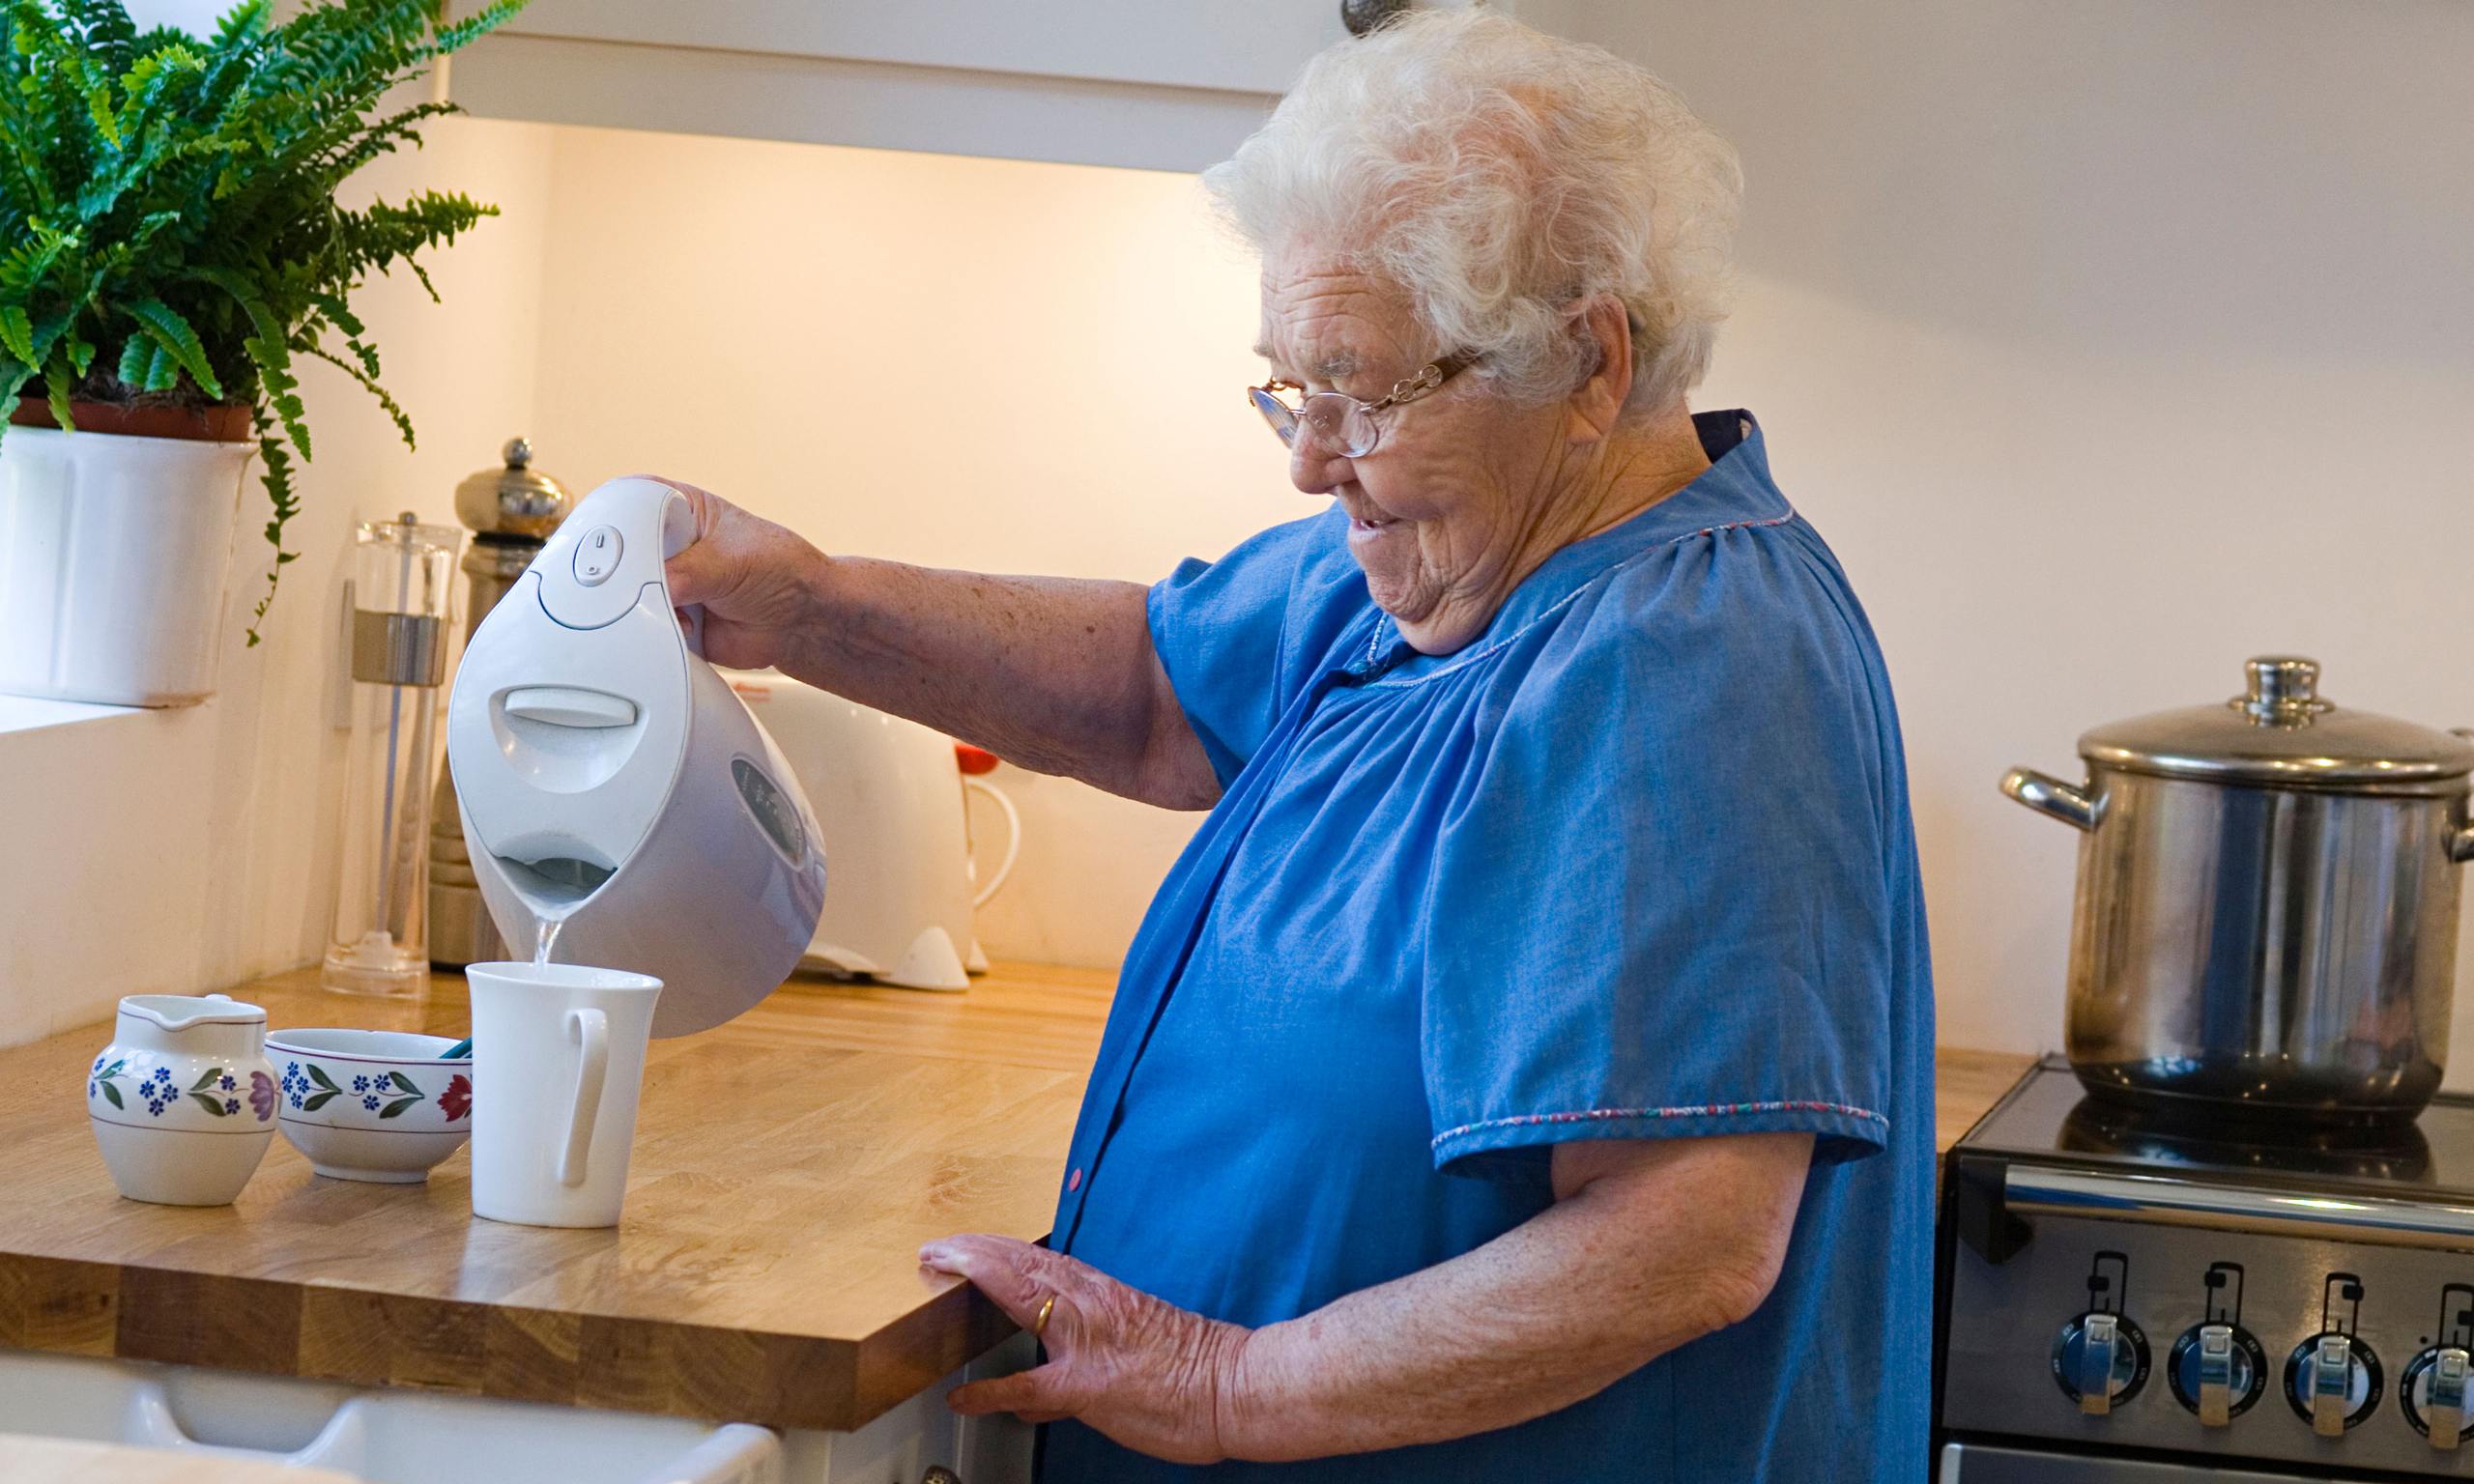 Should residents at care homes help with chores? | Social ...